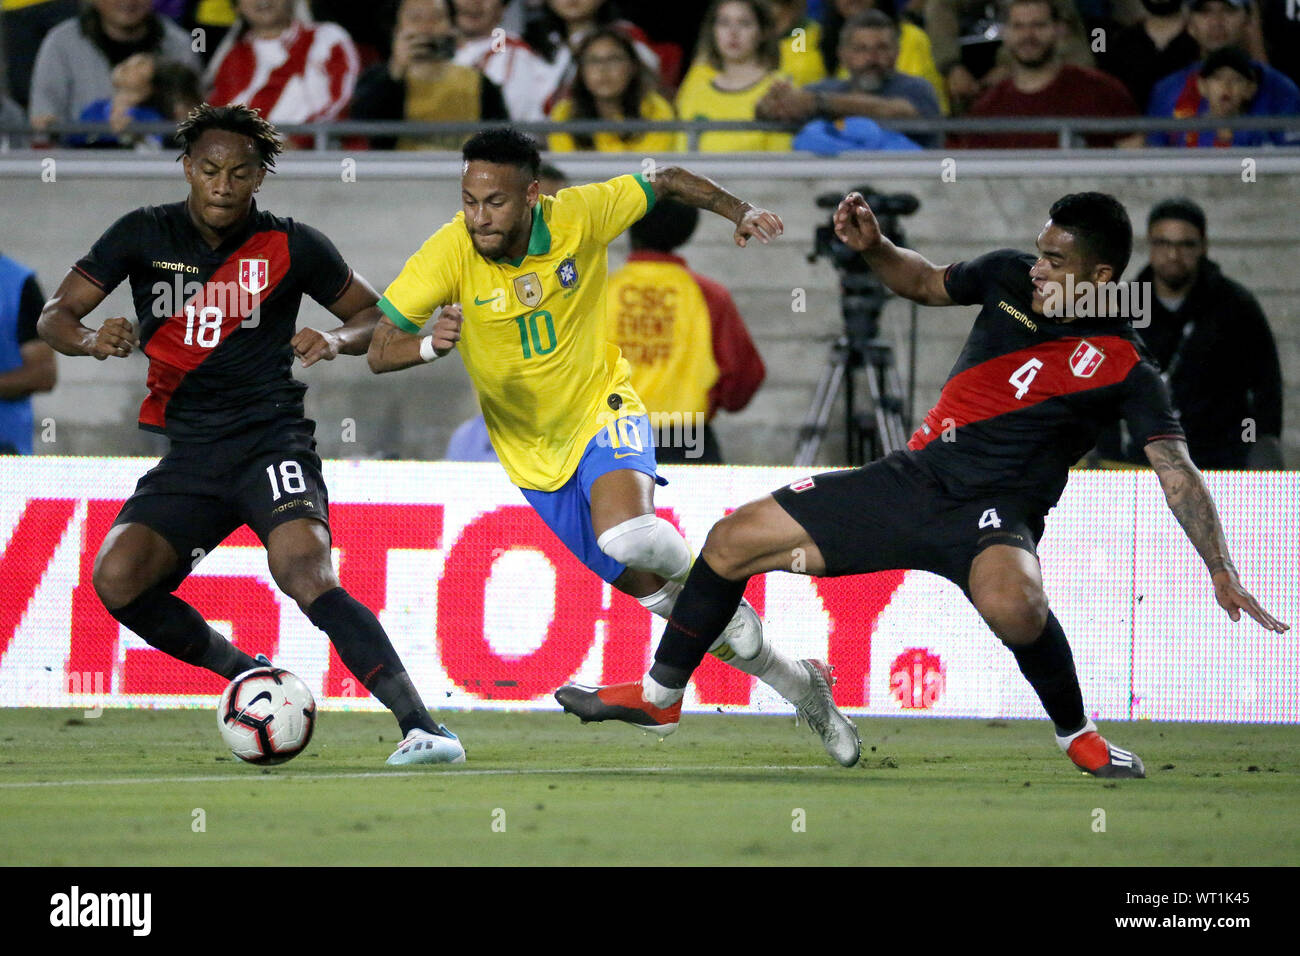 Los Angeles, California, USA. 10th Sep, 2019. Brazil forward Neymar Jr. (10) drives past Peru defender Anderson Santamaria (4) and Peru midfielder Andre Carrillo (18) during an International Friendly Soccer match between Brazil and Peru at the Los Angeles Memorial Coliseum in Los Angeles on Tuesday, September 10, 2019. Credit: Ringo Chiu/ZUMA Wire/Alamy Live News Stock Photo